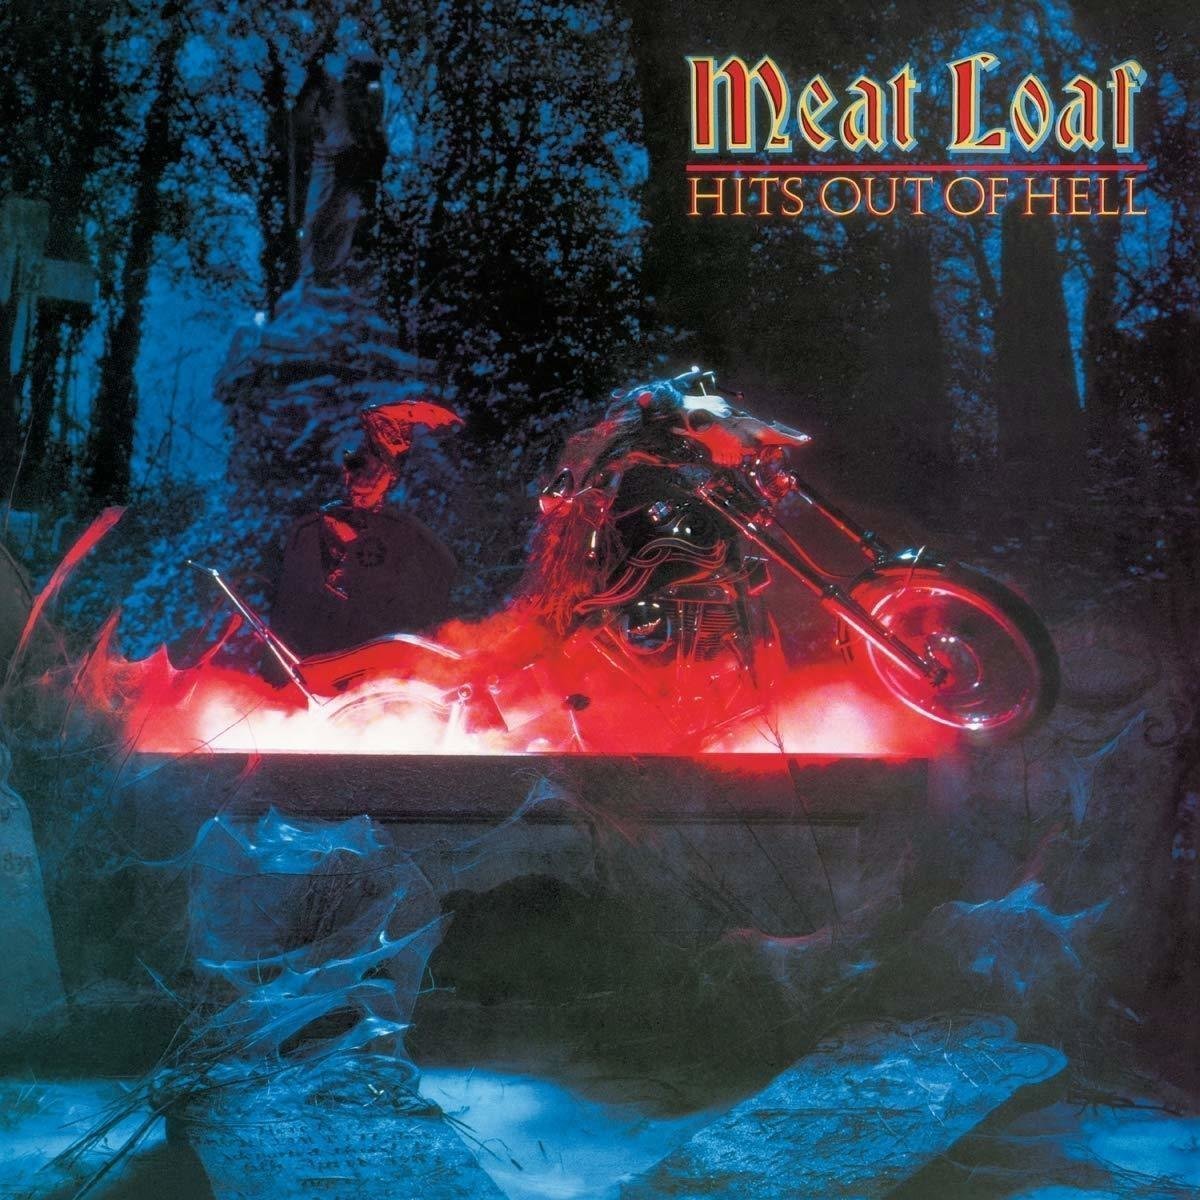 Vinylskiva Meat Loaf Hits Out of Hell (LP)